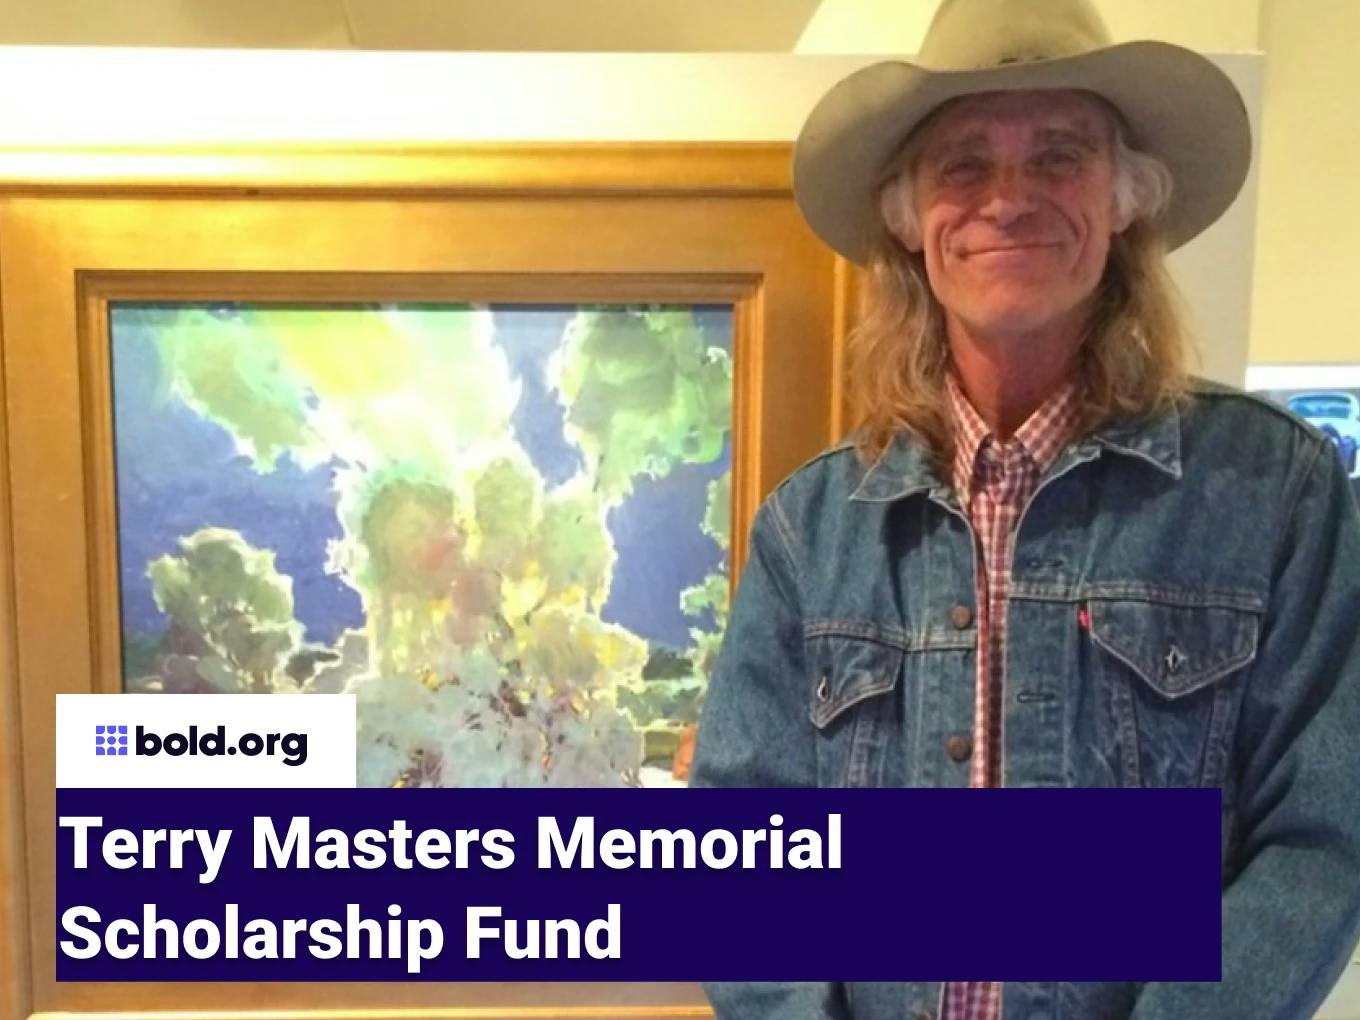 Terry Masters Memorial Scholarship Fund